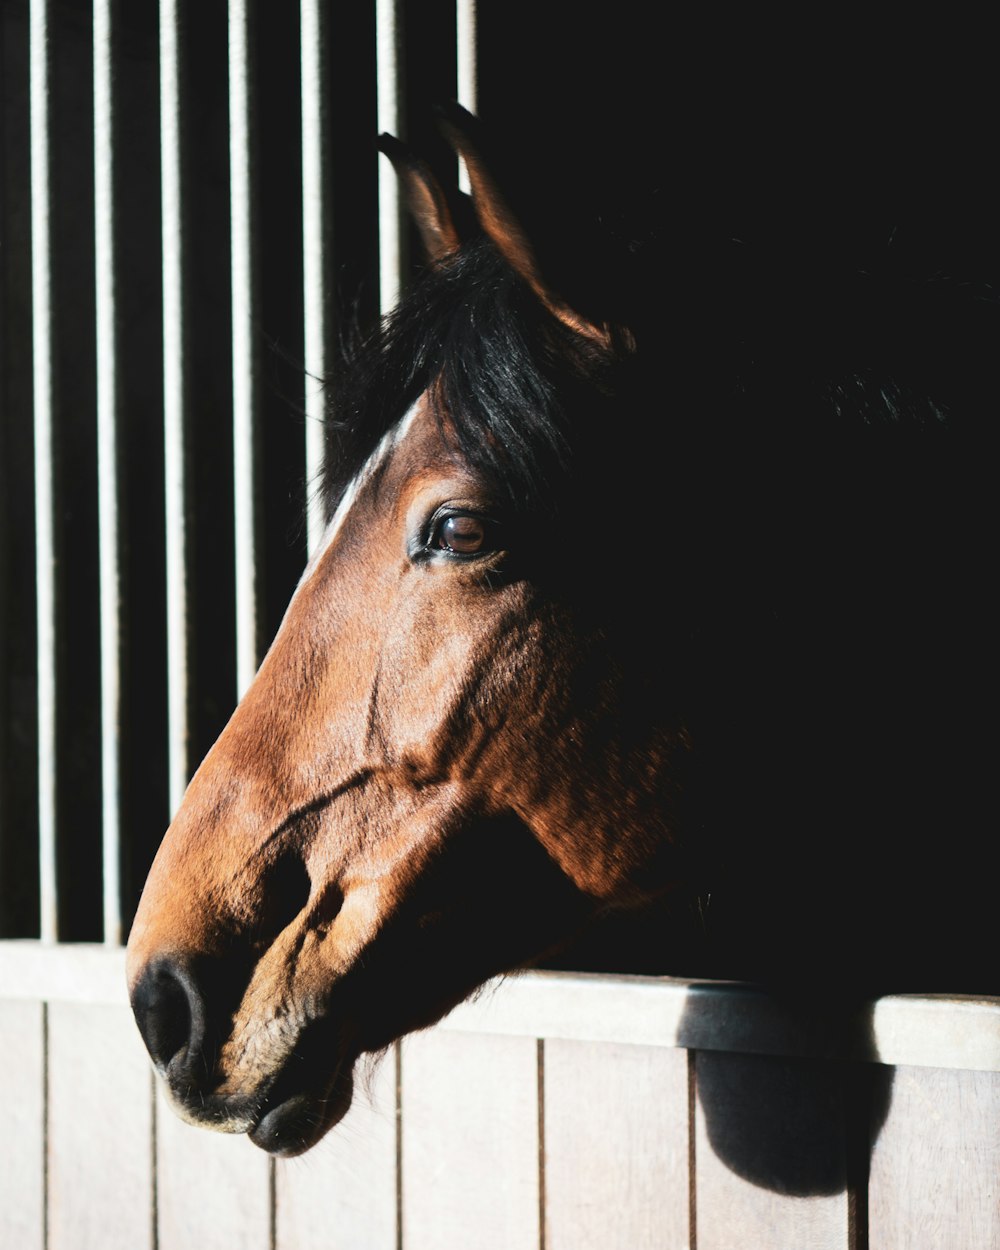 brown horse head in close up photography